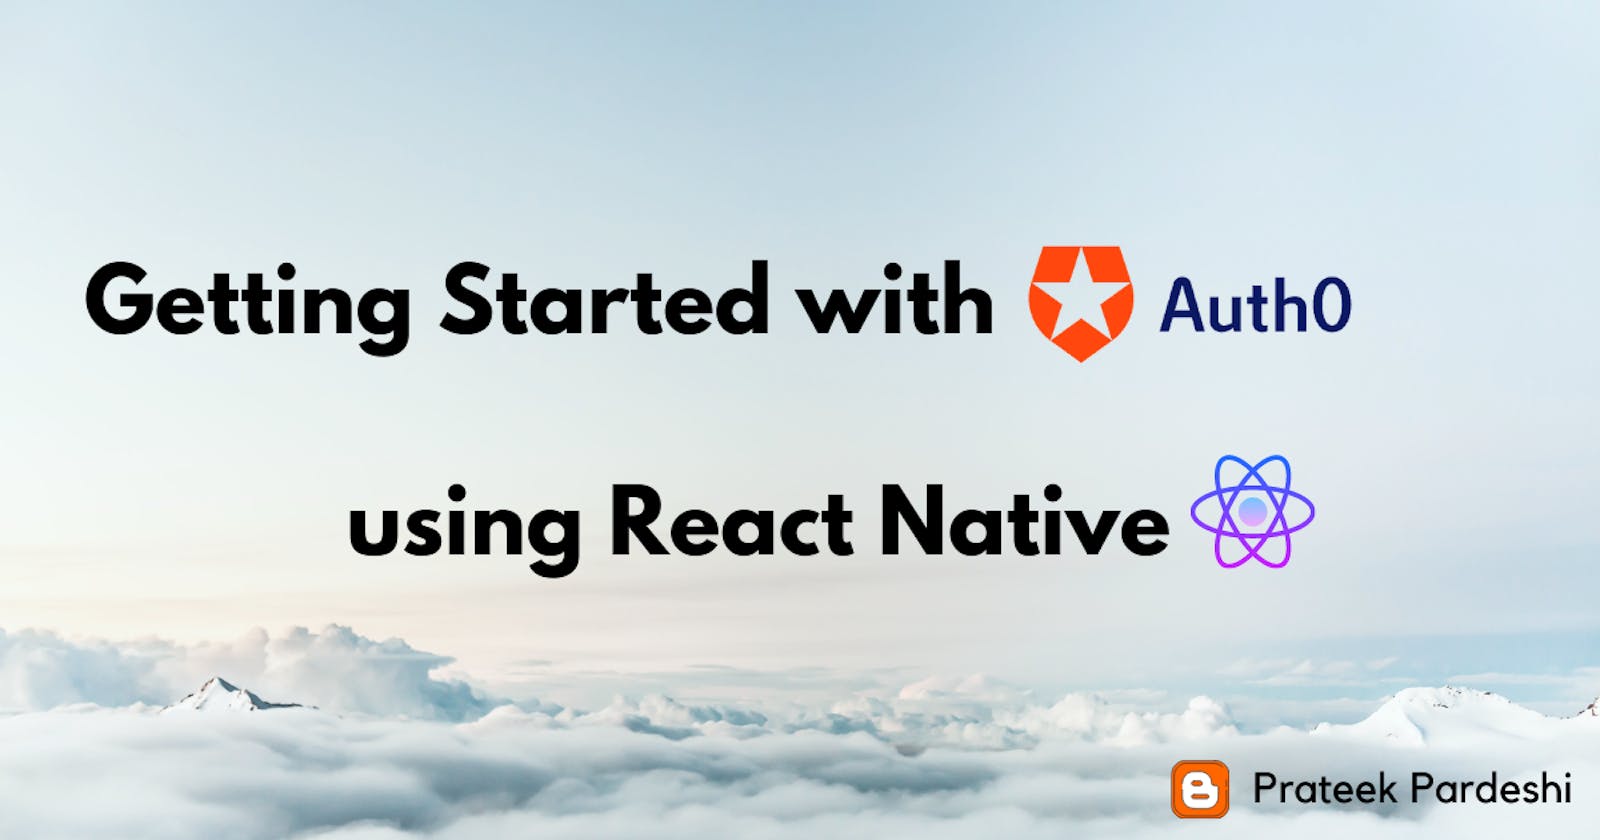 Getting Started with Auth0 using React Native (Android)